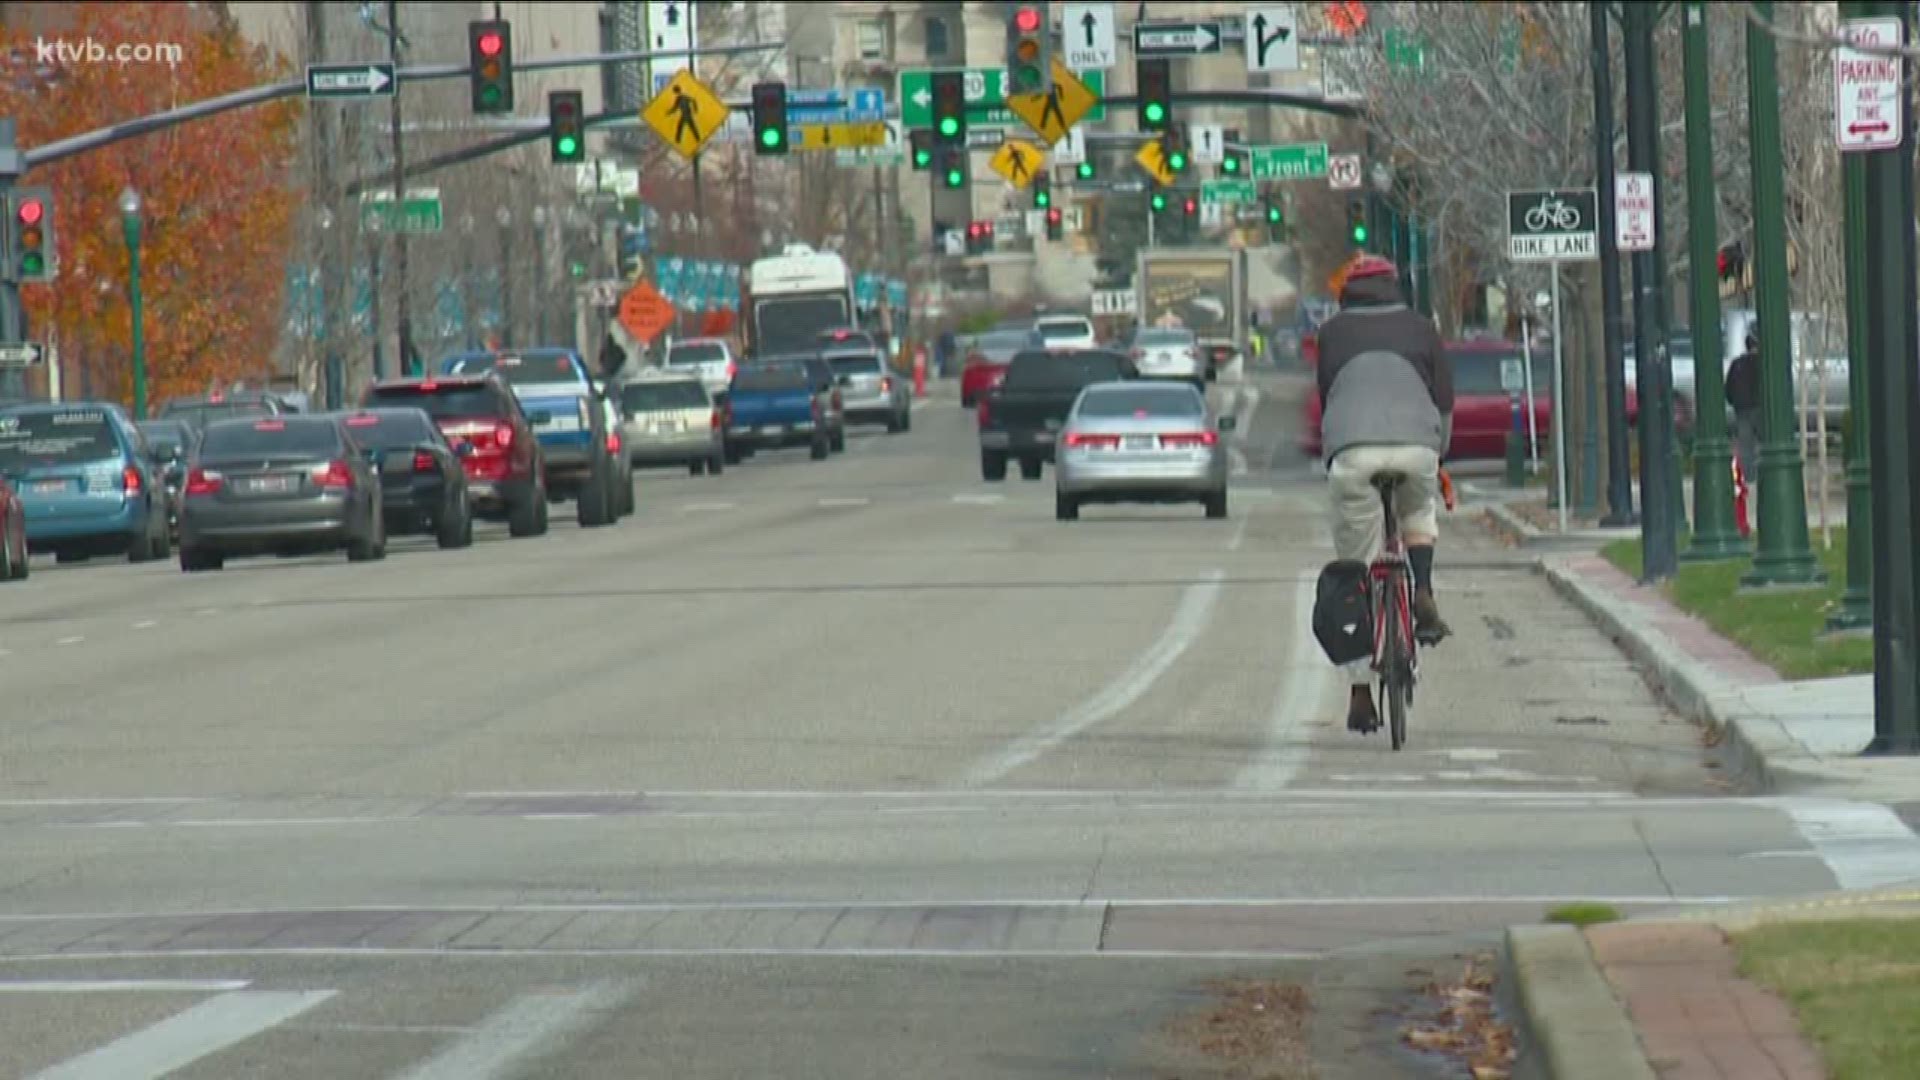 It was a busy Tuesday night for the Boise City Council - who discussed several issues related to growth in the area. From a possible new city park, to changing rules about cars and bicyclists and controversy over a condo proposal - city leaders had a lot to discuss.